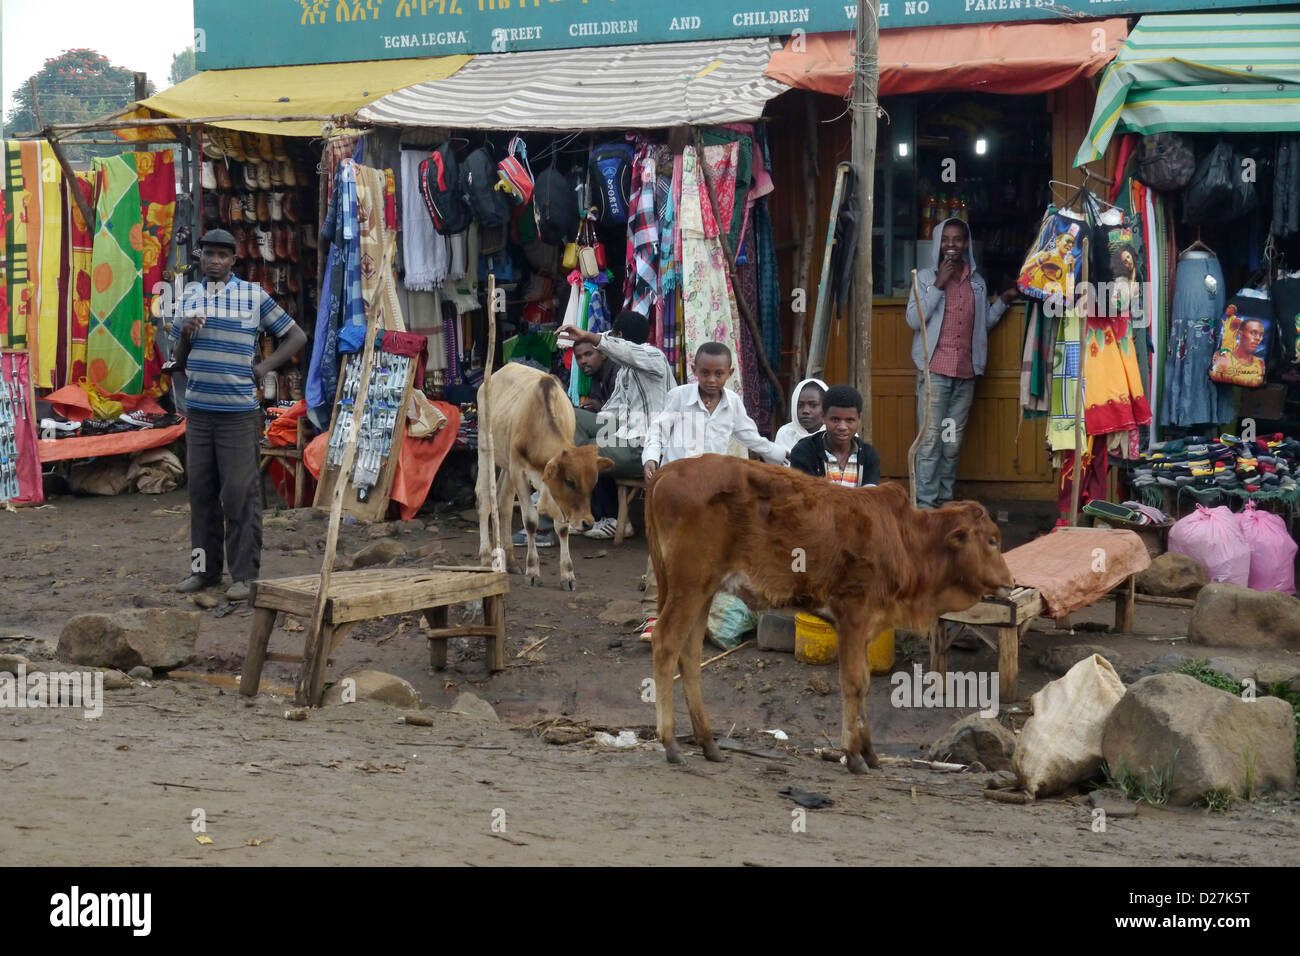 ETHIOPIA Street scenes on a rainy day in Chagni, Beni Shangul Gumuz region. A small shop with cow in foreground. Stock Photo